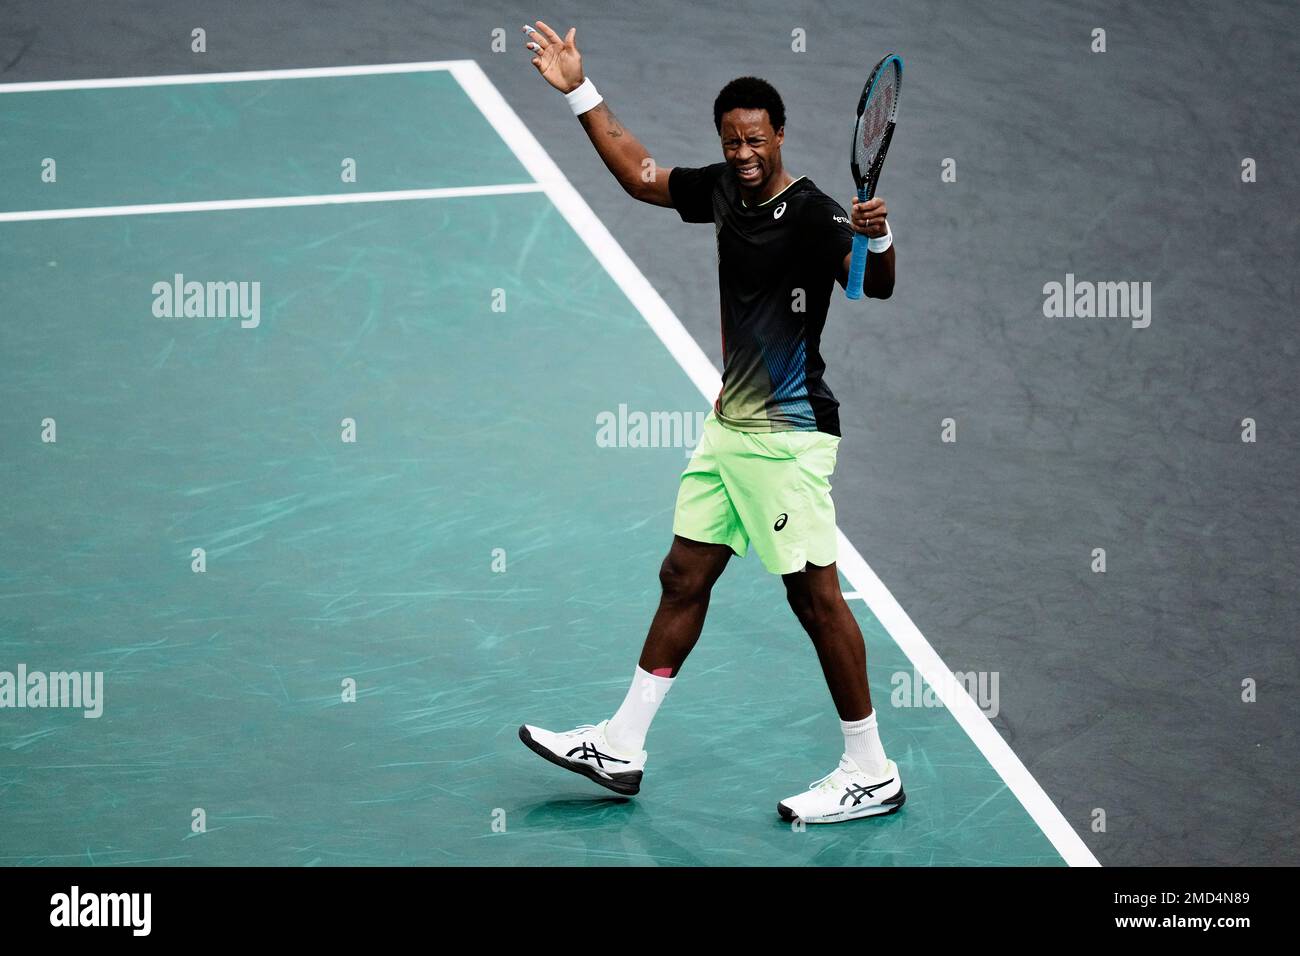 Frances Gael Monfils celebrates after winning a point during his match against Serbias Miomir Kecmanovic at the Paris Masters tennis tournament at the Bercy Arena in Paris, Tuesday, Nov